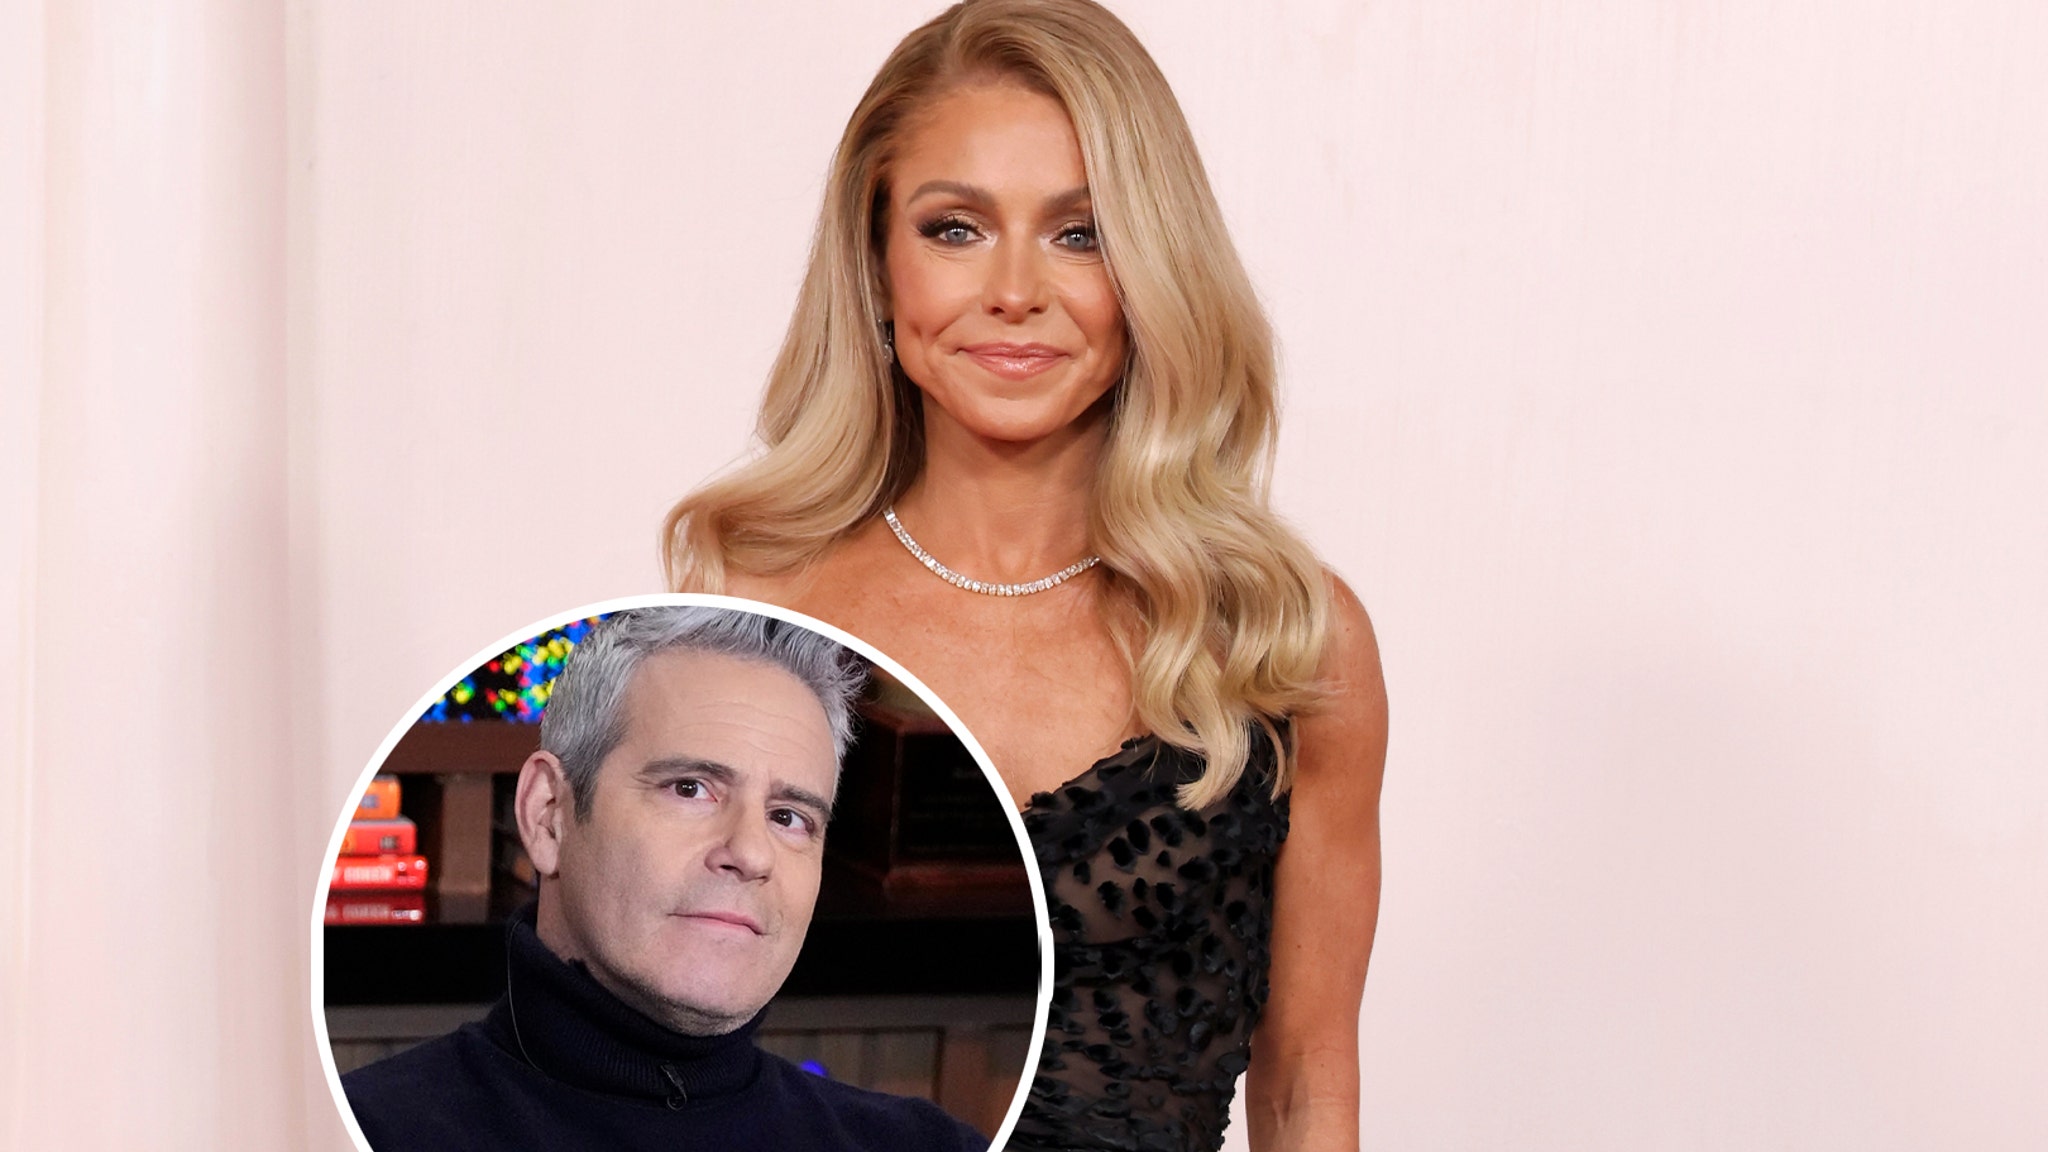 Kelly Ripa Says She's 'Offended' and 'Angry' Over Andy Cohen Drug Allegations